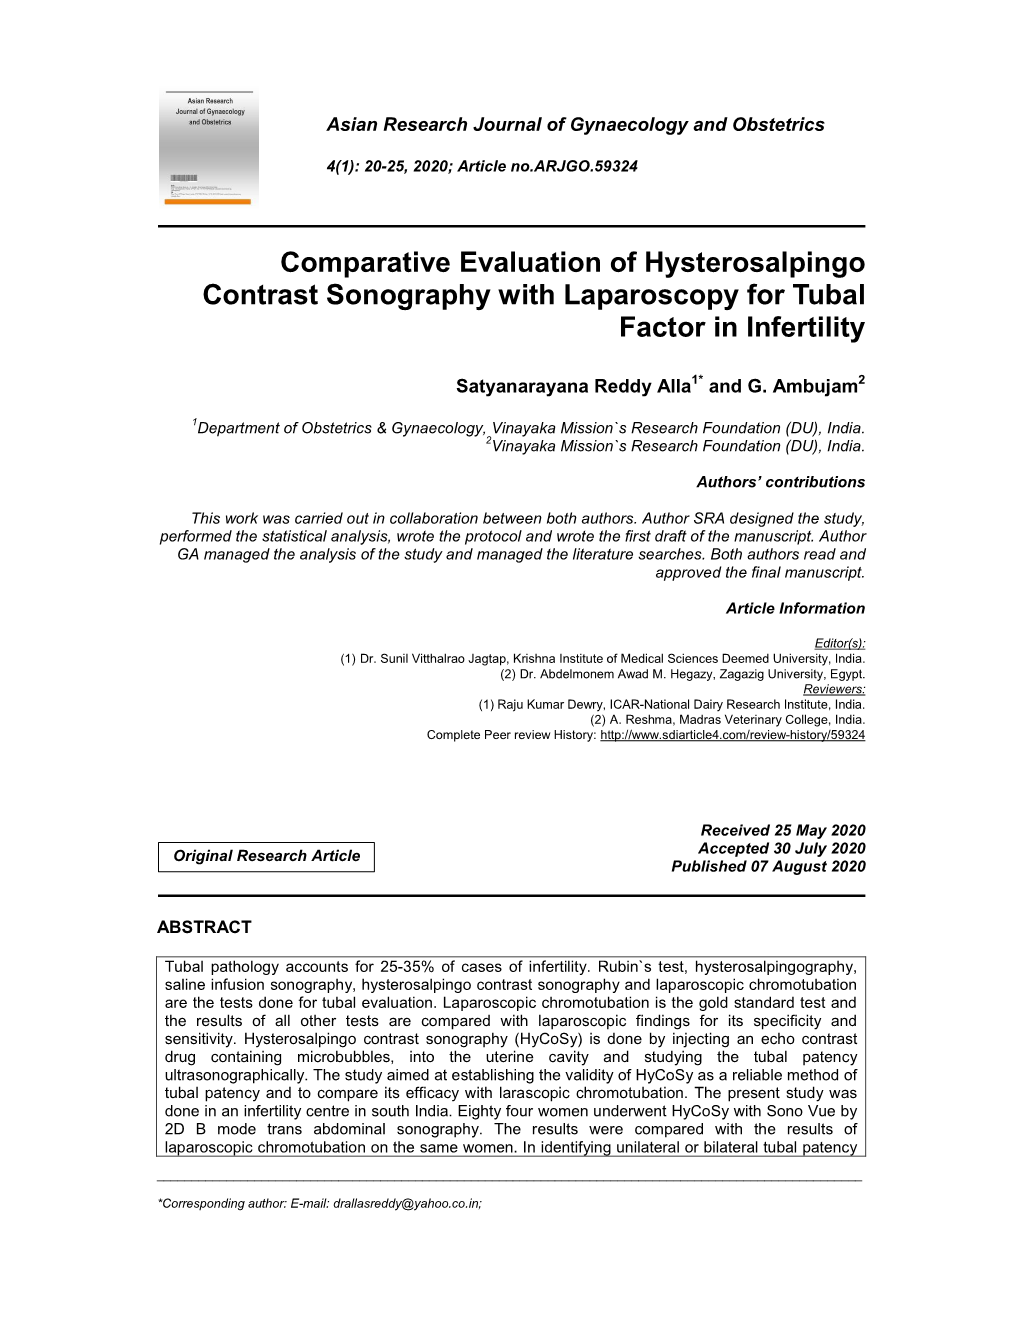 Comparative Evaluation of Hysterosalpingo Contrast Sonography with Laparoscopy for Tubal Factor in Infertility